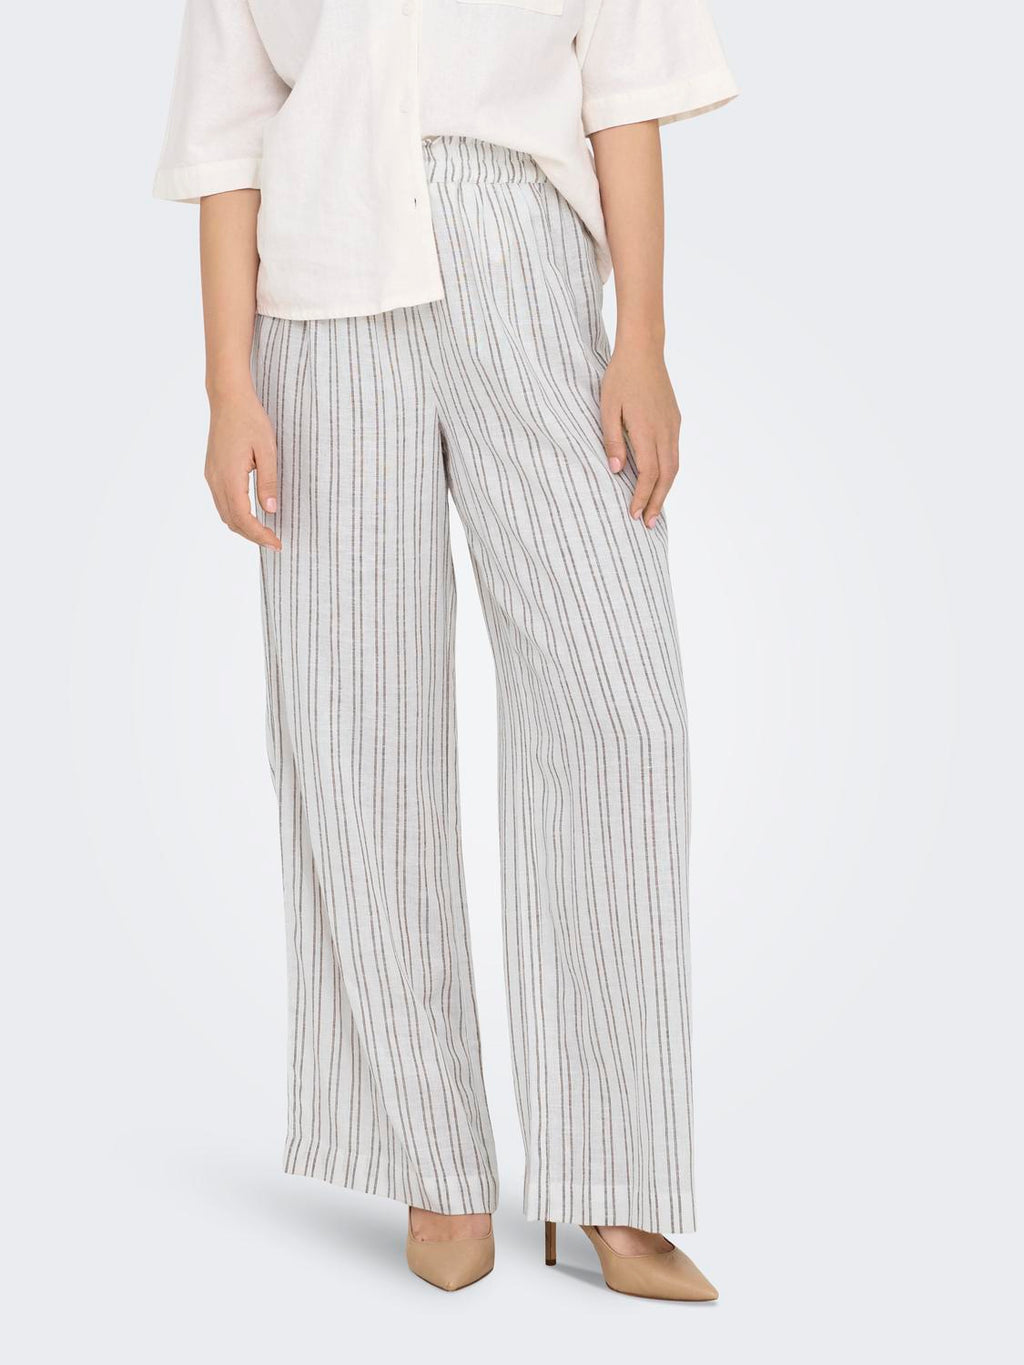 Tokyo Striped Pants - ONLY